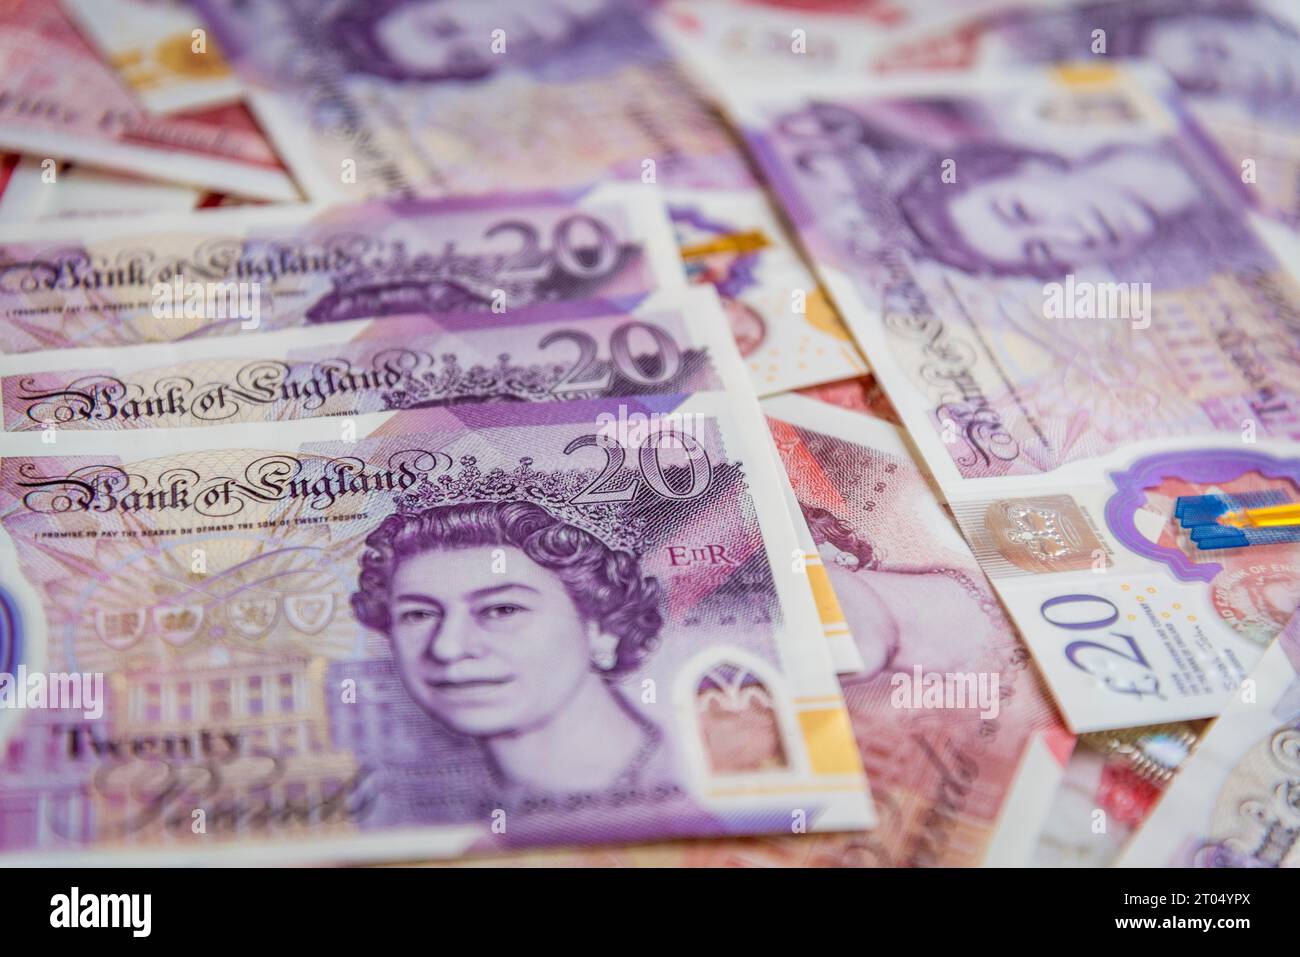 Pound sterling banknotes Stock Photo